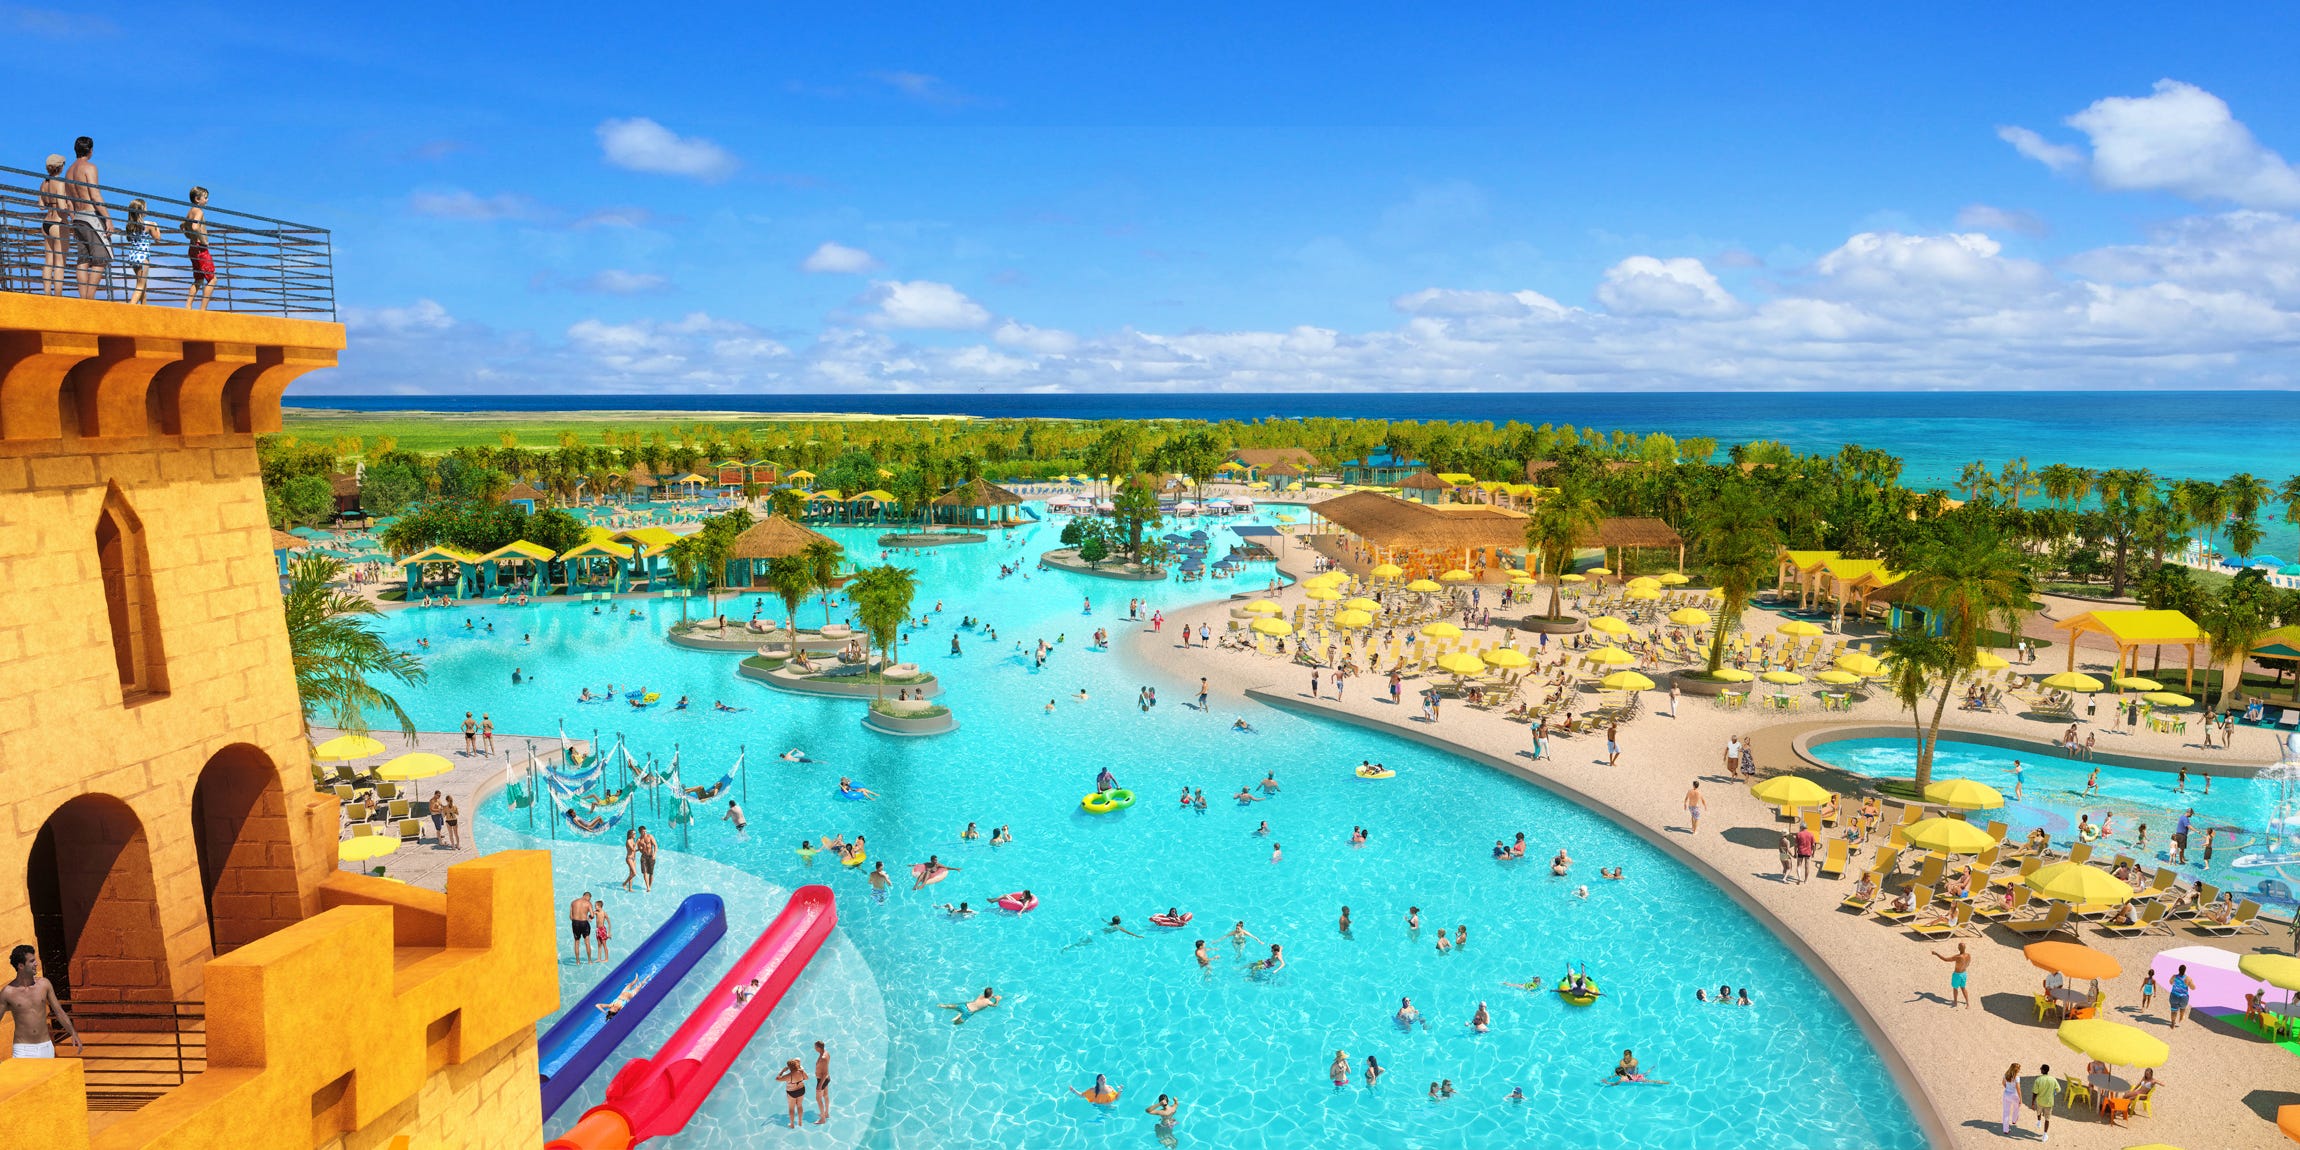 <p>But what's better than one exclusive port? Two of them. </p><p>The cruise giant is now building another destination just for its guests: Celebration Key, a mile-long resort-like getaway on <a href="https://www.businessinsider.com/photos-i-sailed-margairatvilles-new-cruise-ship-wont-again-2022-5">Grand Bahama Island</a>.</p><p>The $600 million project, Carnival Corp's largest, is set to open in 2025 — a sign that the company is "clearly following Royal Caribbean's footsteps," Patrick Scholes, lodging and leisure research analyst at Truist Securities, told Business Insider in March.</p>